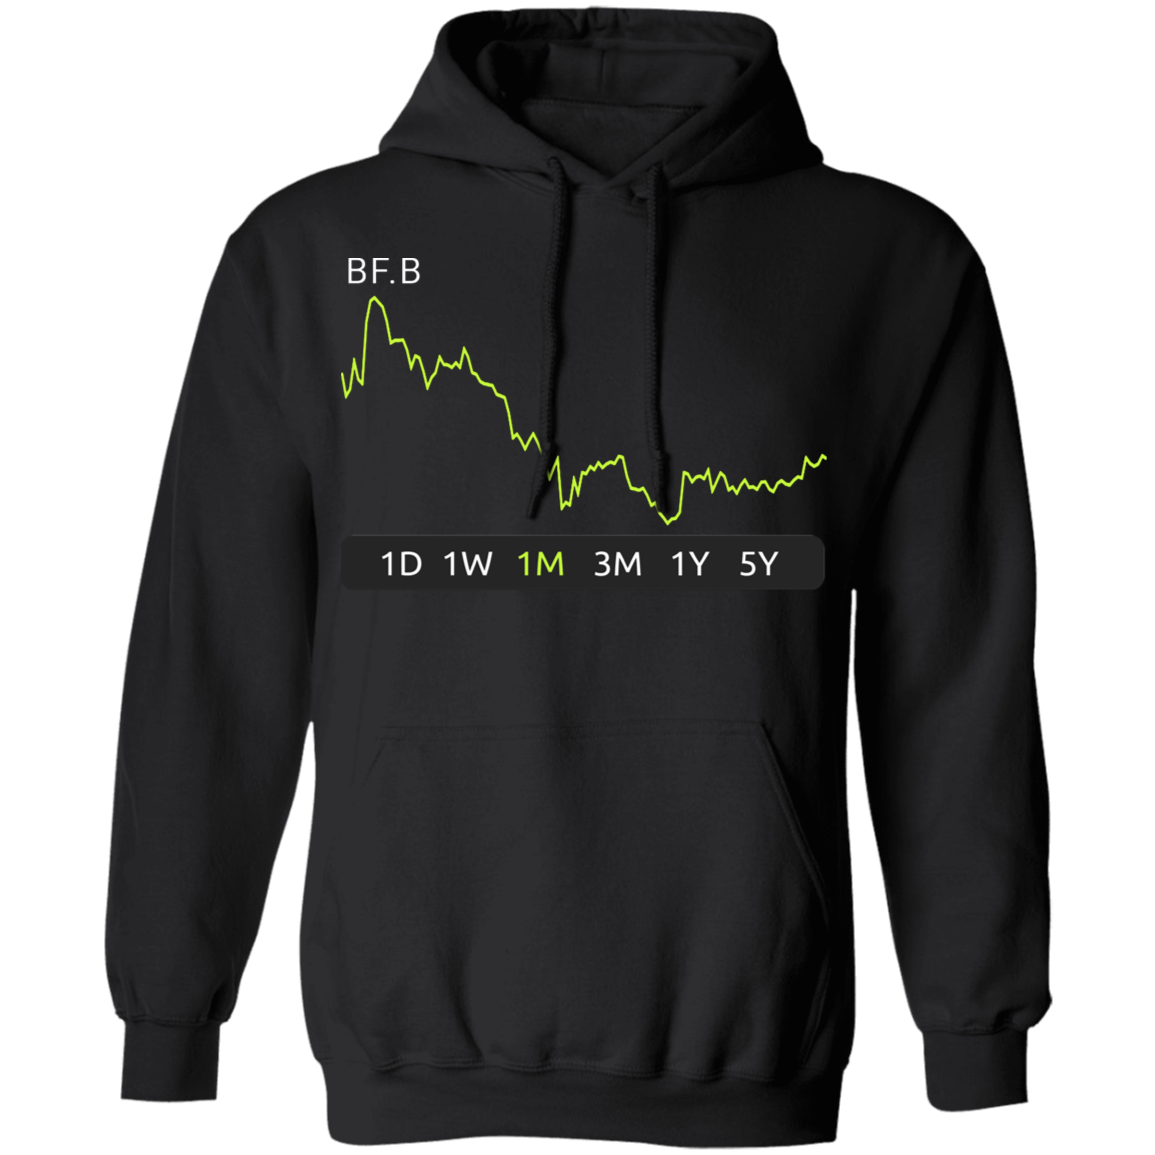 BF.B Stock 1m Pullover Hoodie